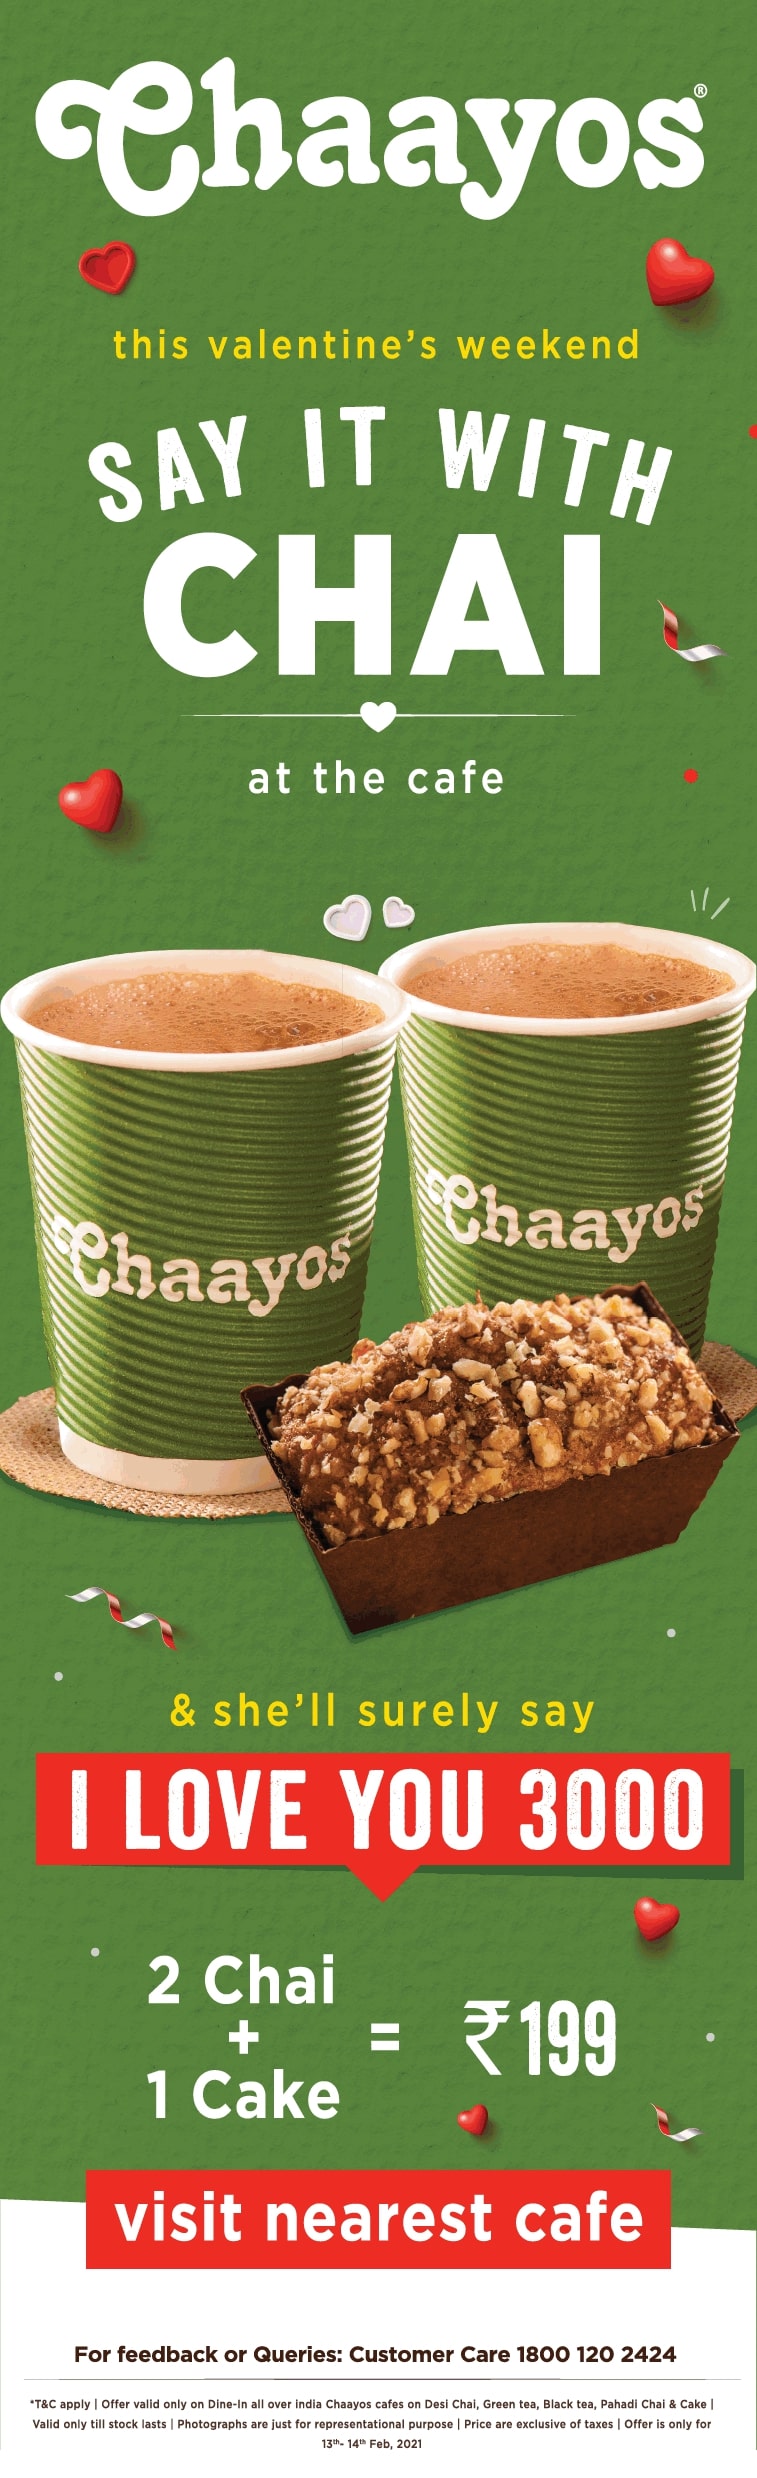 chaayos-say-it-with-chai-ad-delhi-times-13-02-2021